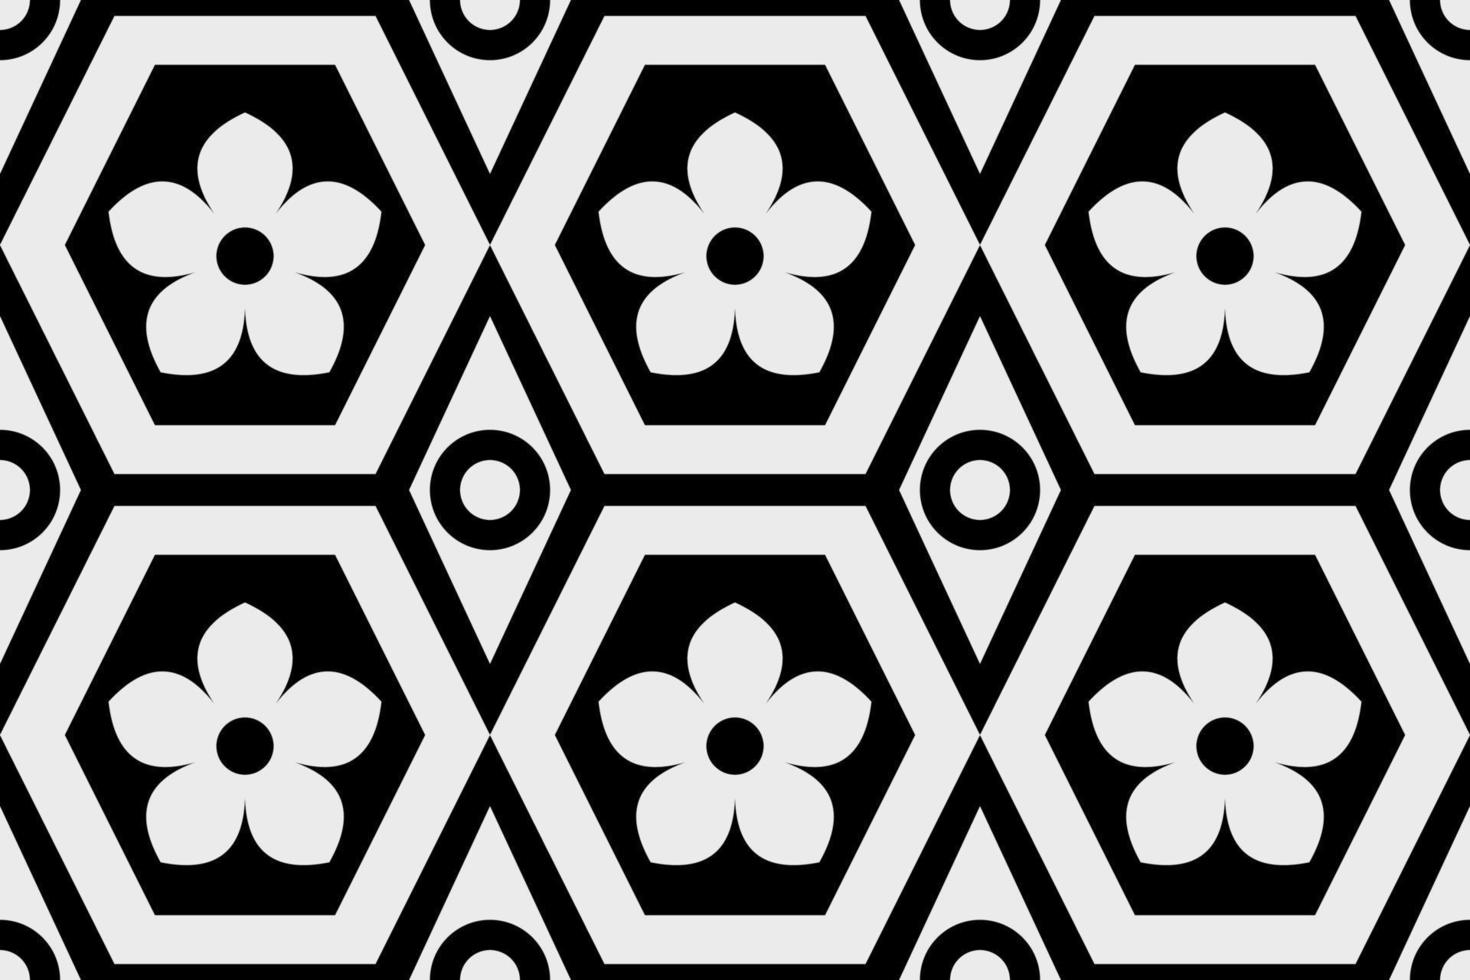 Black and white geometric ethnic seamless pattern design for wallpaper, background, fabric, curtain, carpet, clothing, and wrapping. vector